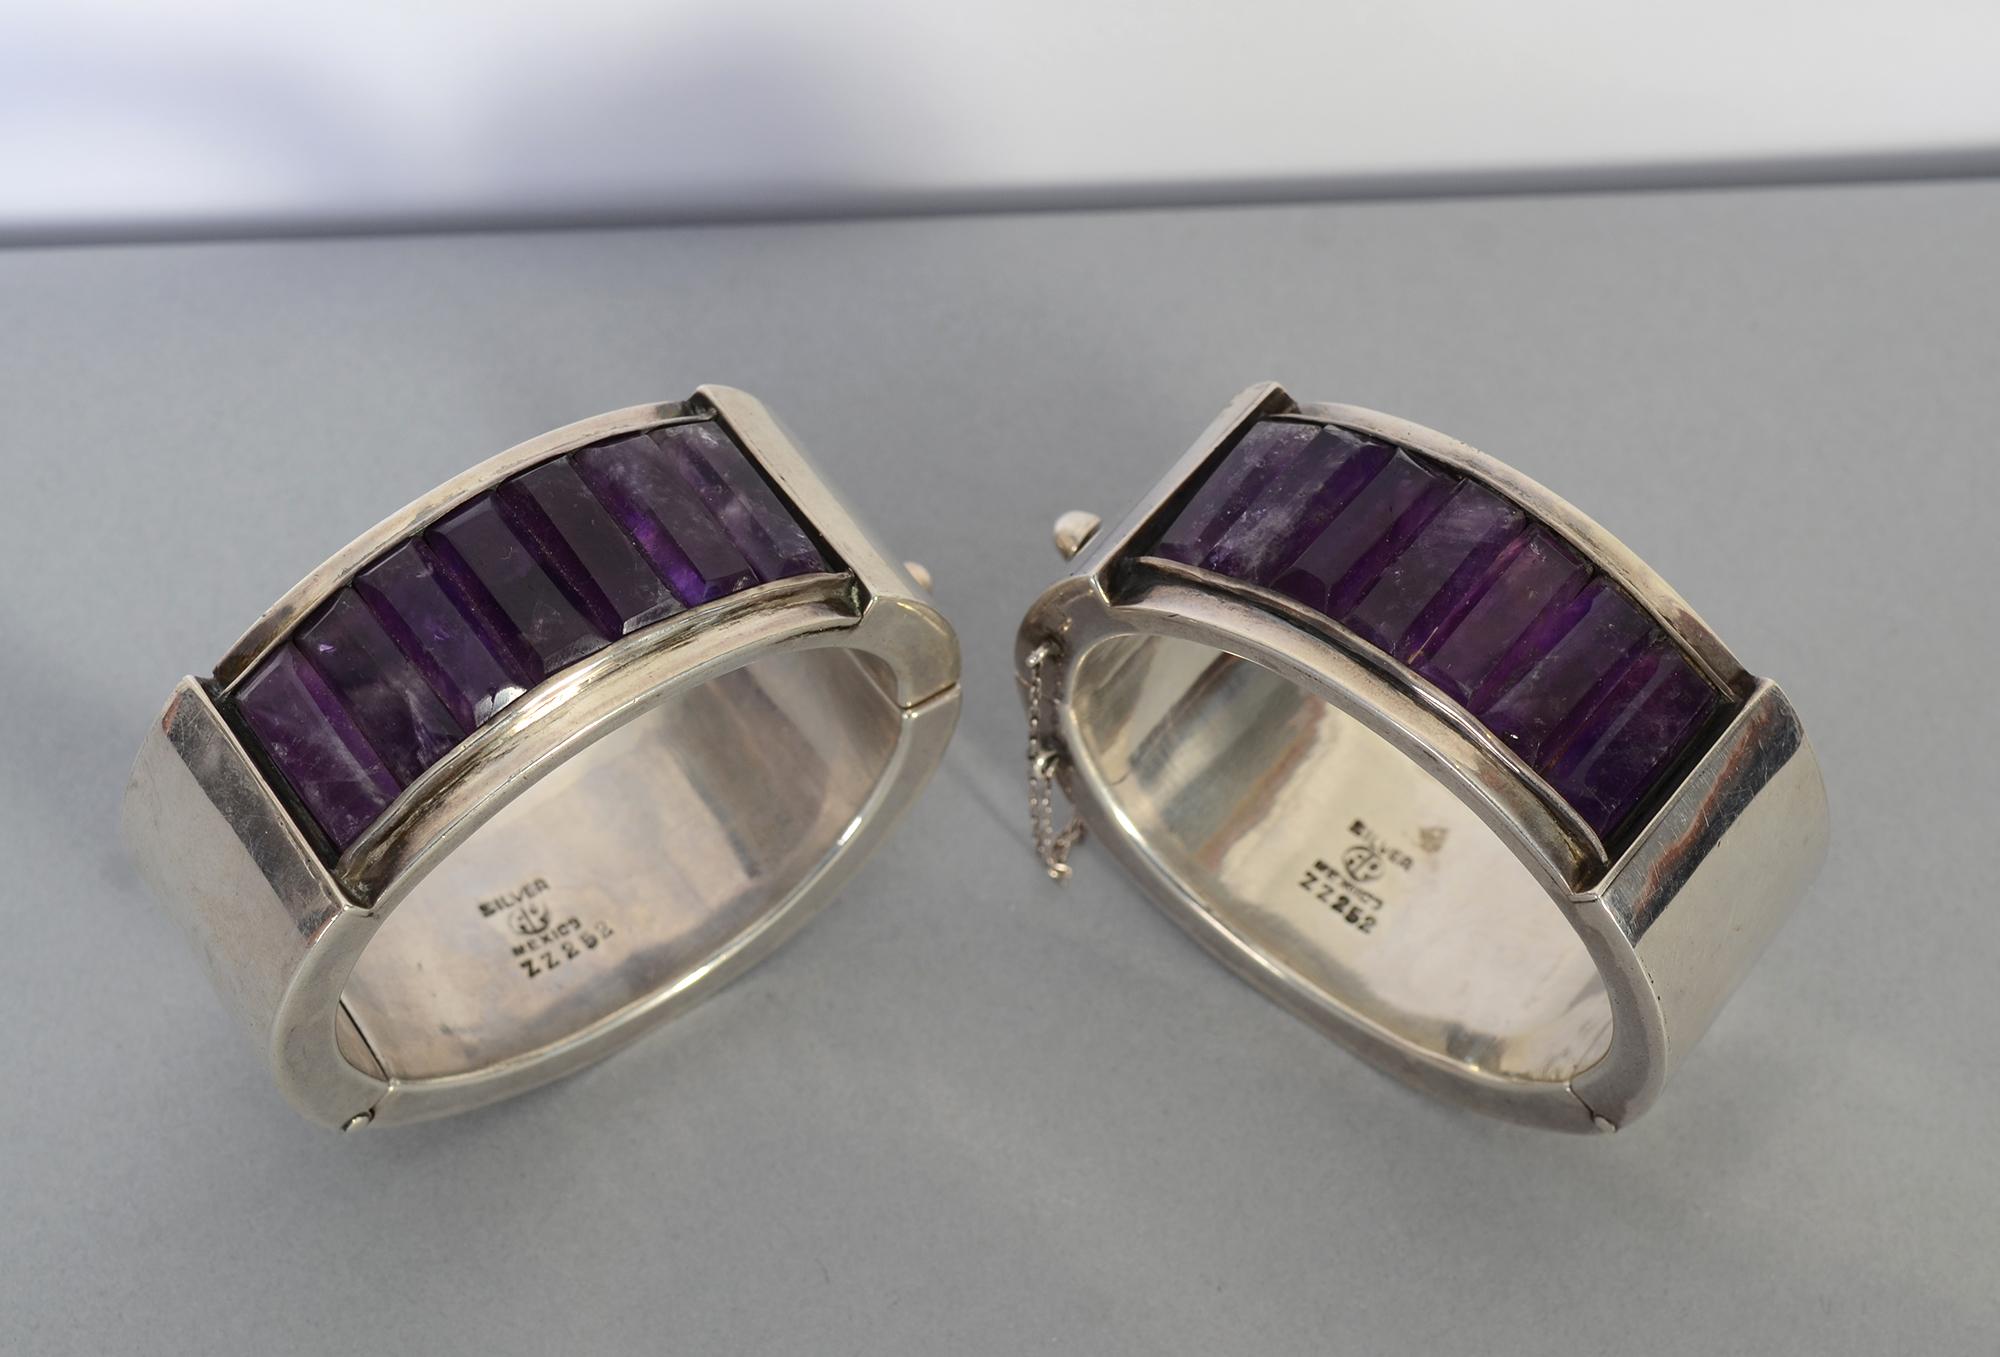 
This is a stunning and unusual pair of early Antonio Pineda bangle bracelets made of sterling silver and amethyst. Both bracelets have Antonio's mark used between 1941 and 1949. They measures 1 3/16